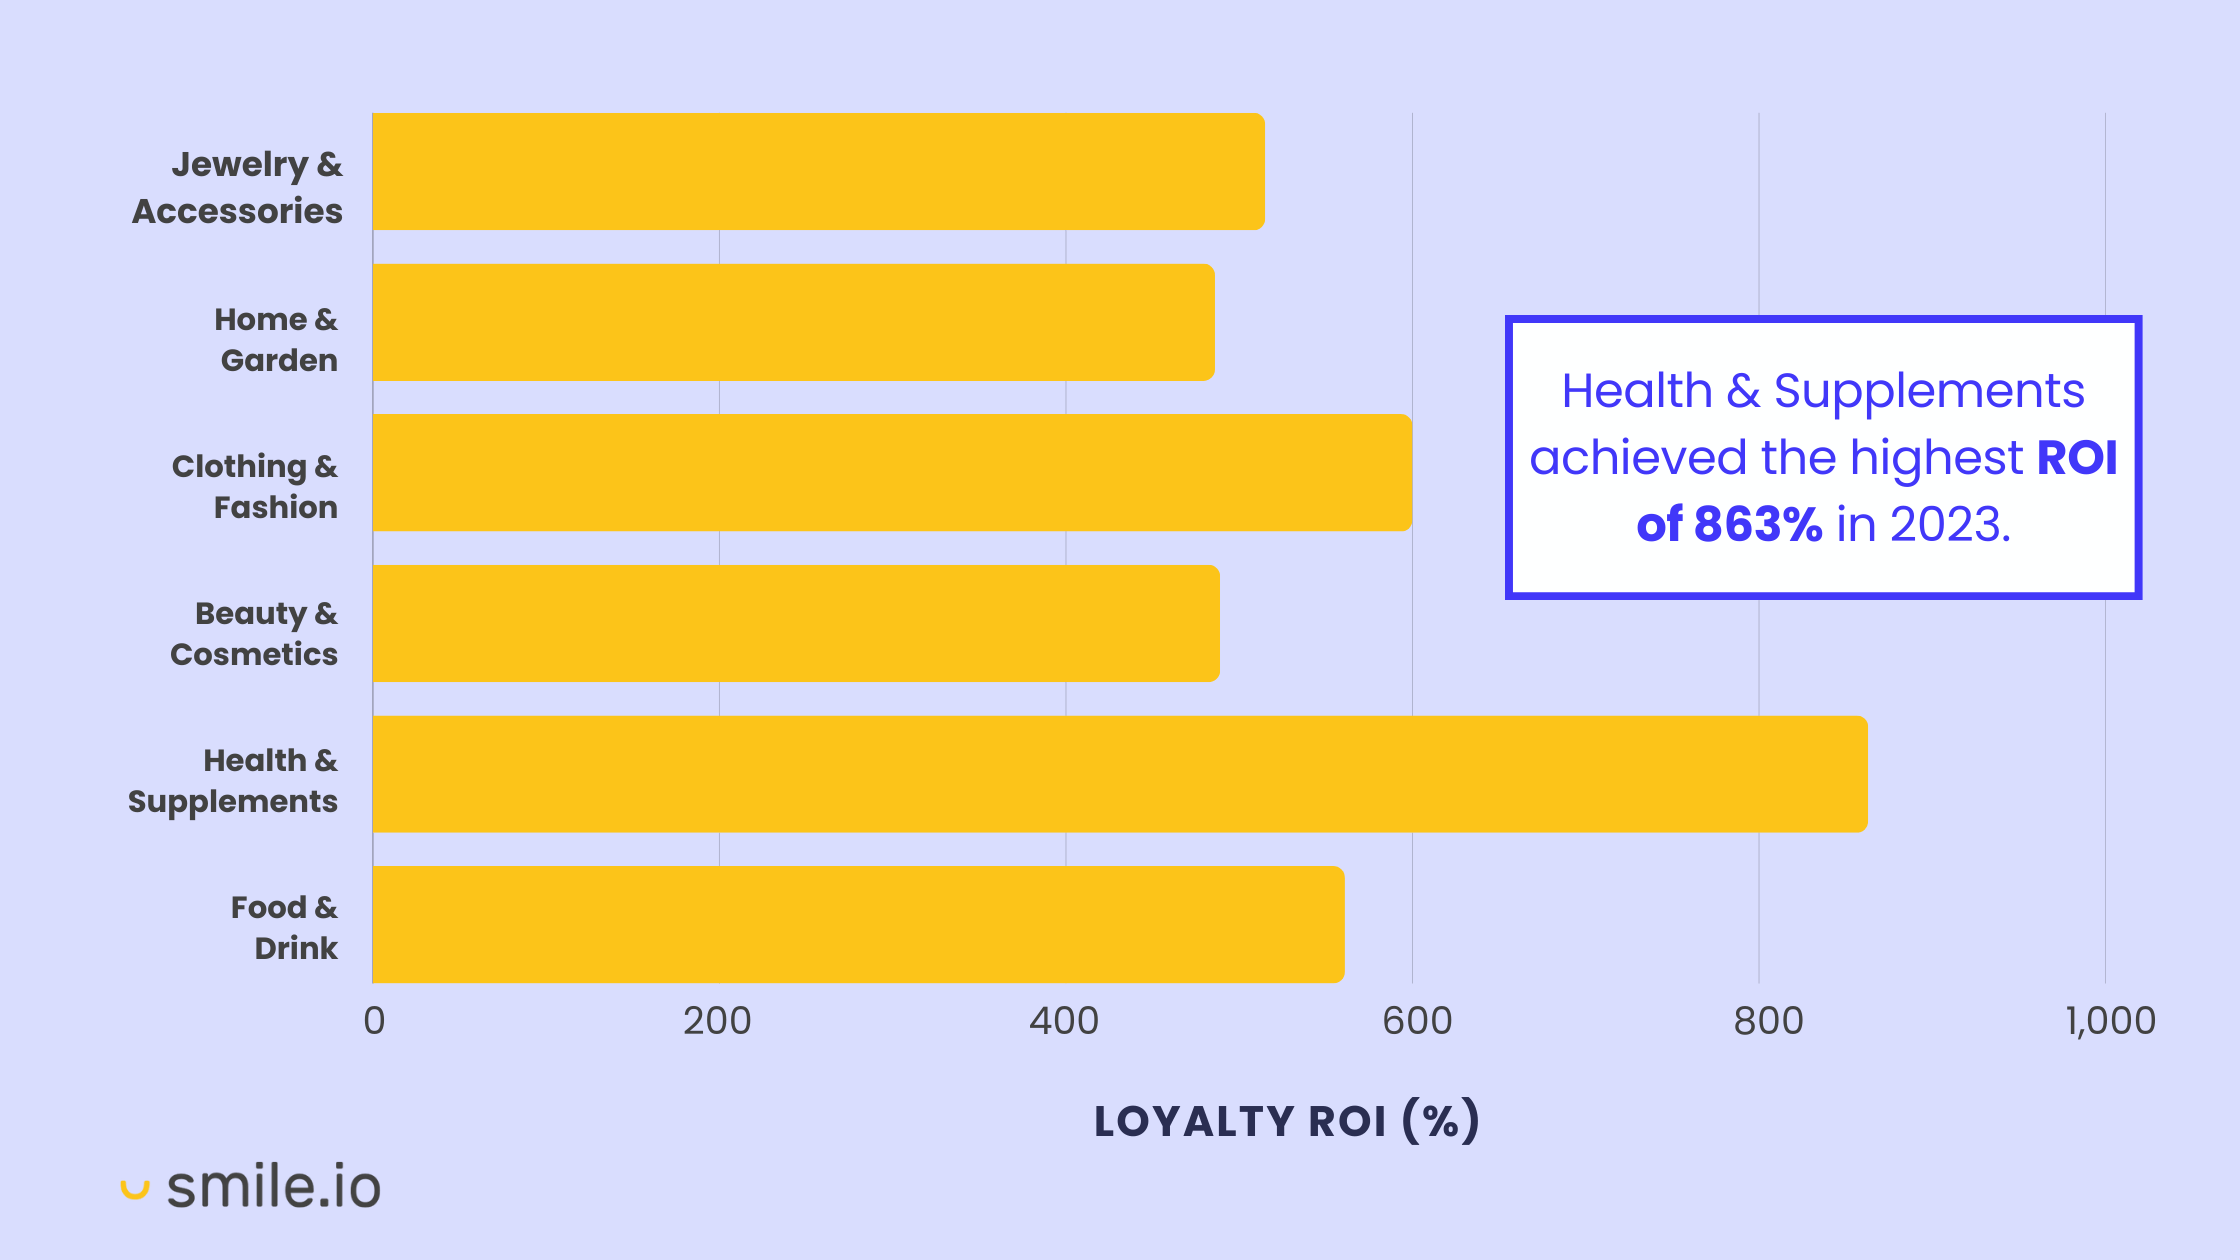 A bar graph showing the Loyalty ROI in 2023 for 6 main industries (Jewelry & Accessories, Home & Garden, Clothing & Fashion, Beauty & Cosmetics, Health & Supplements, and Food & Drink). A call-out says Health and Supplements achieved the highest ROI of 863% in 2023.